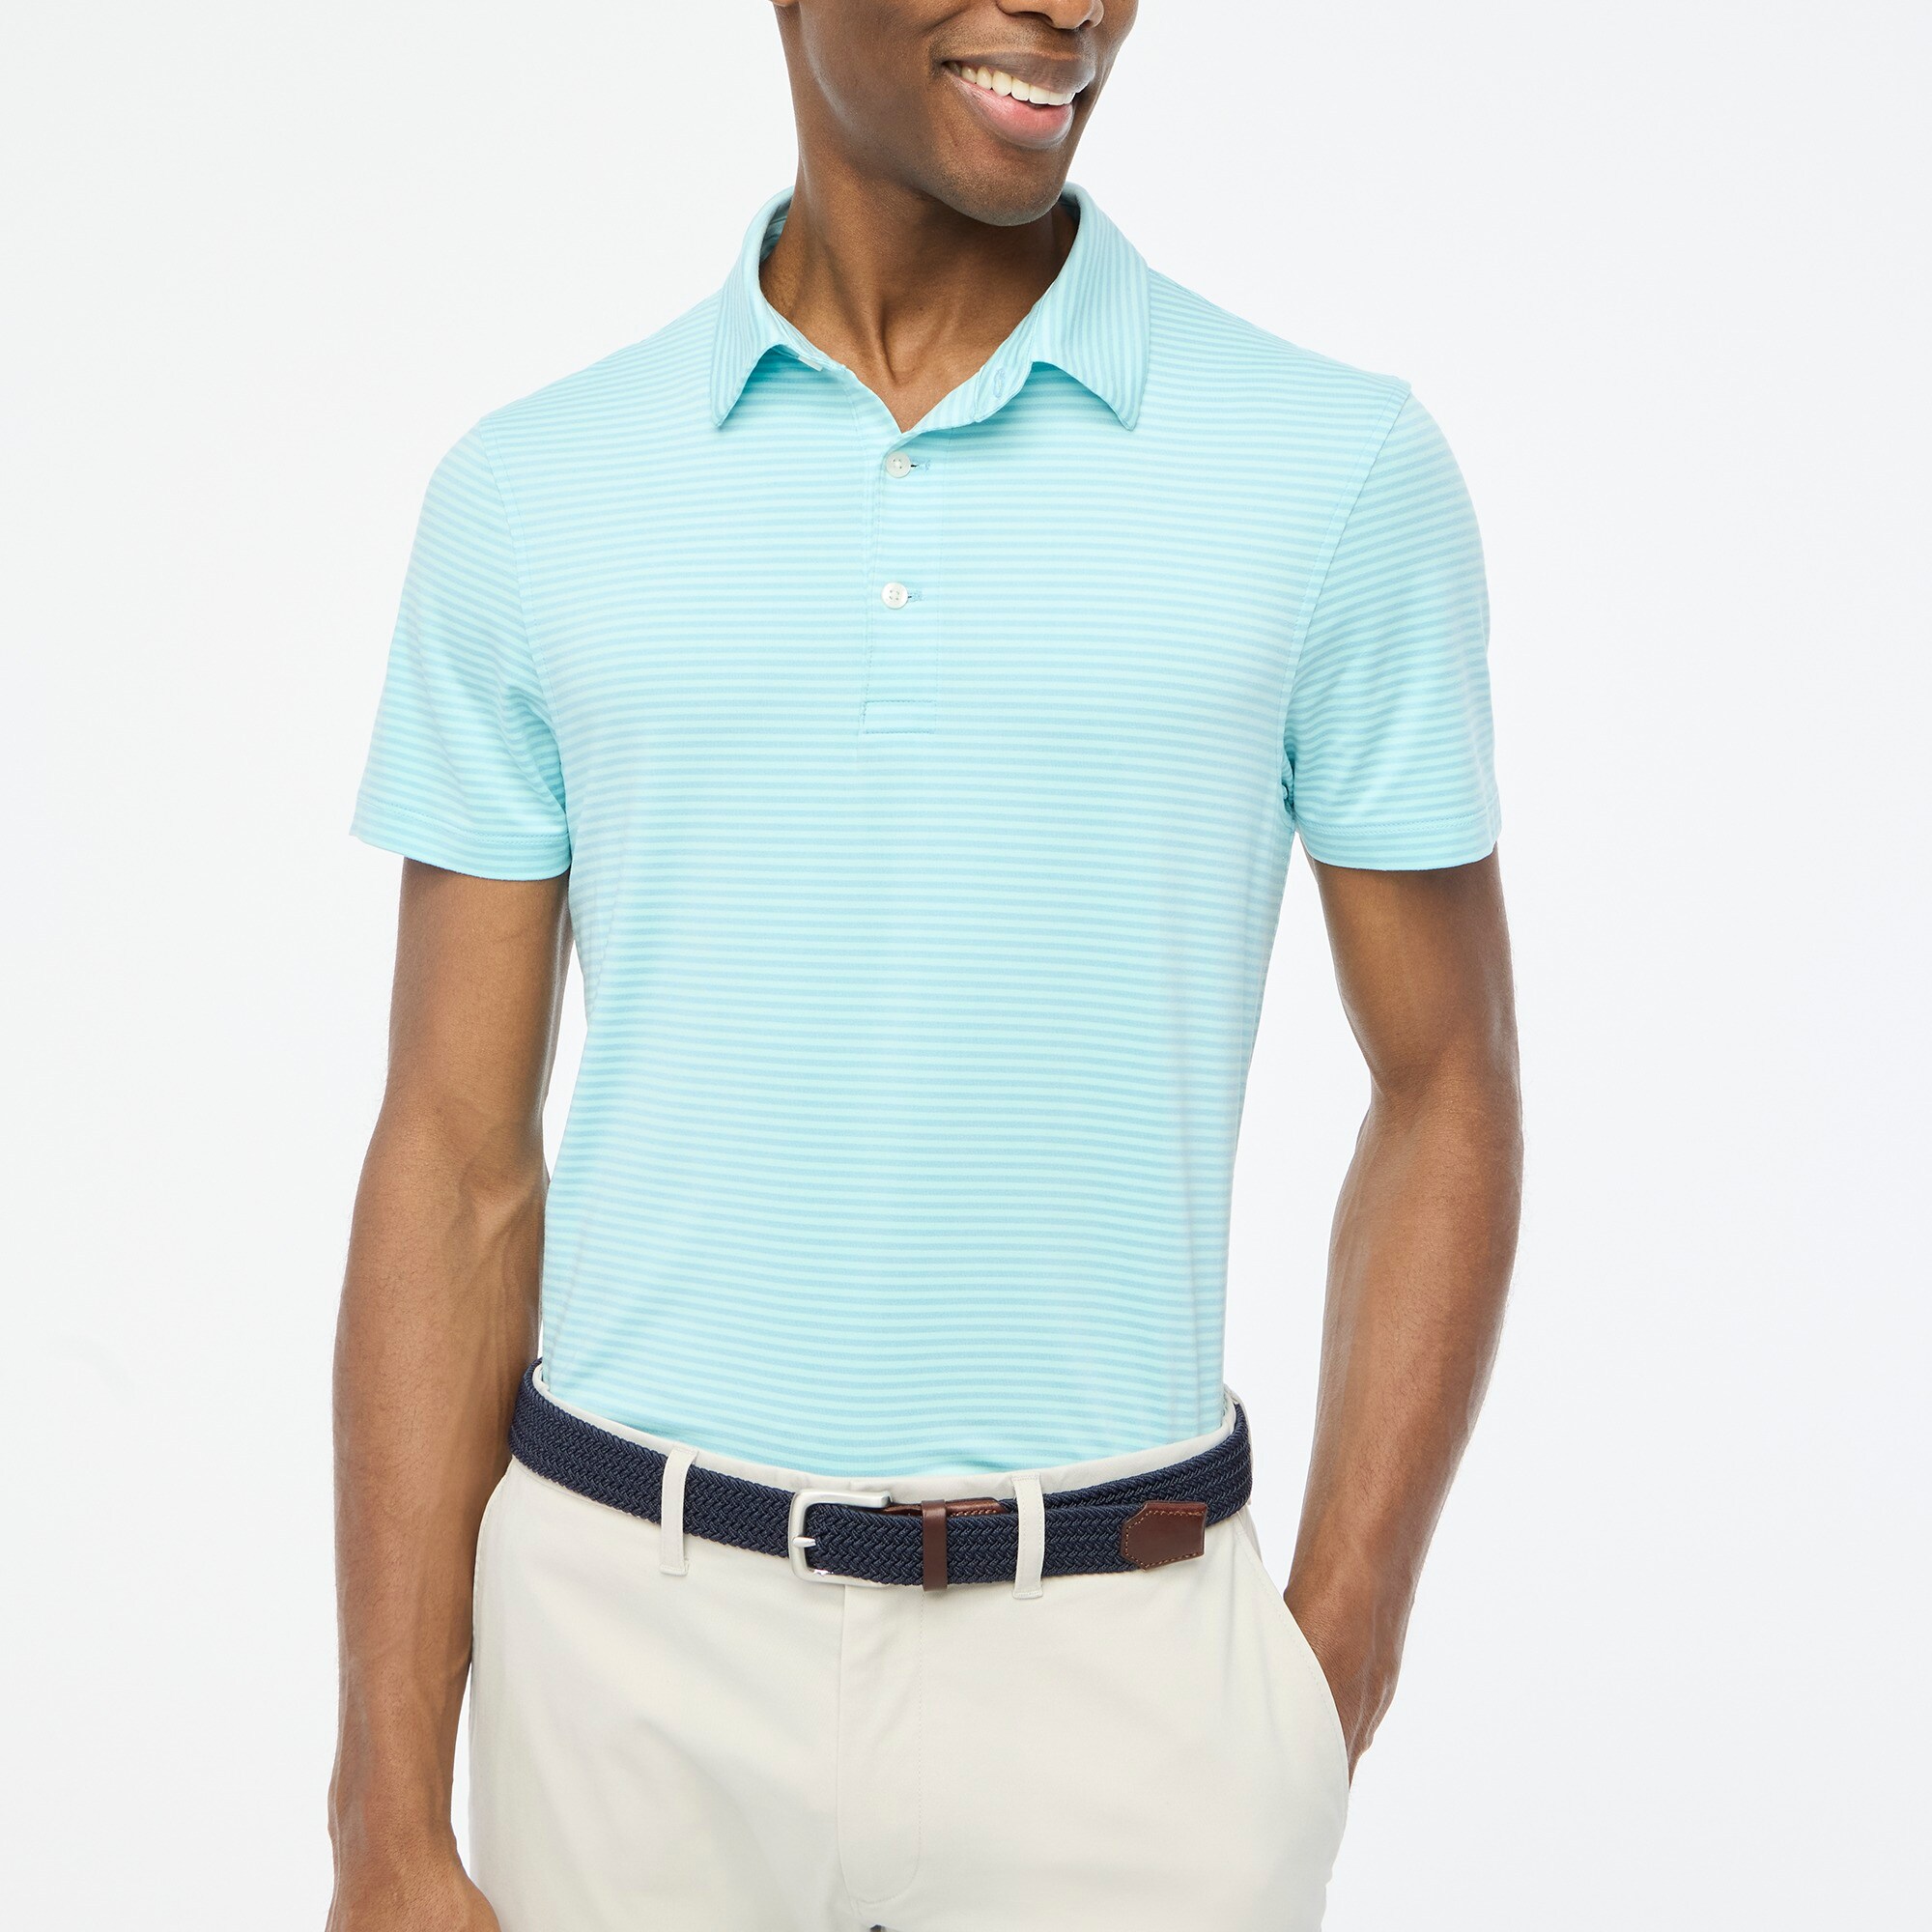 factory: striped performance polo shirt for men